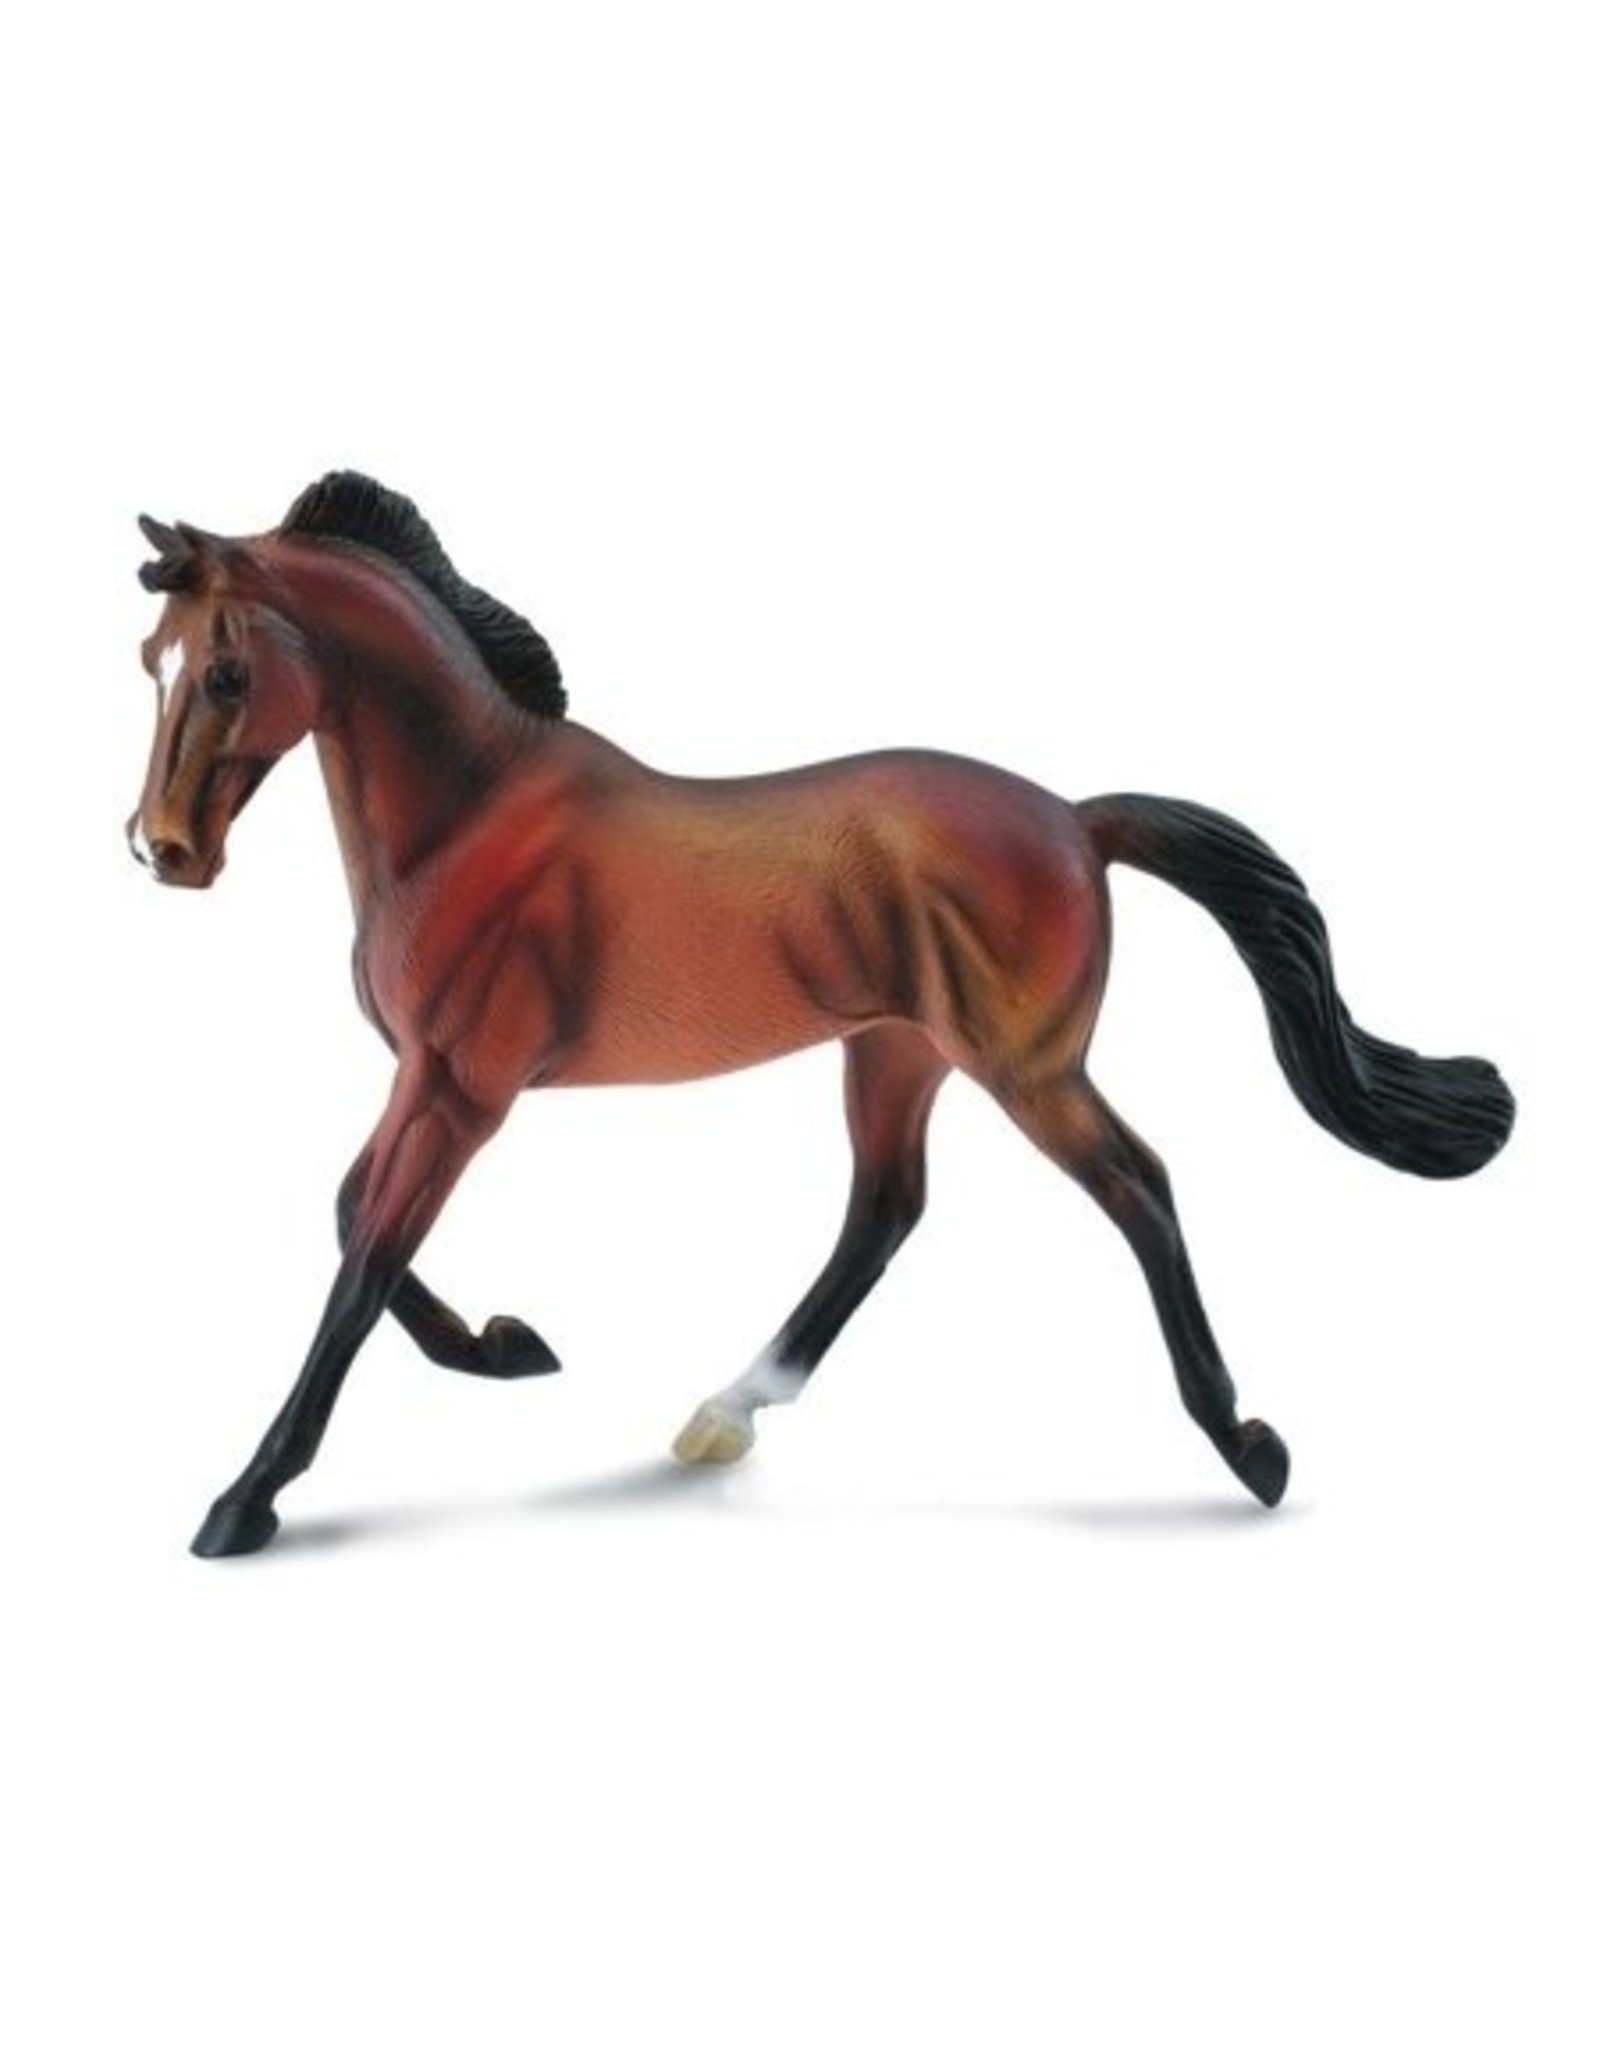 CollectA Bay Thoroughbred Mare